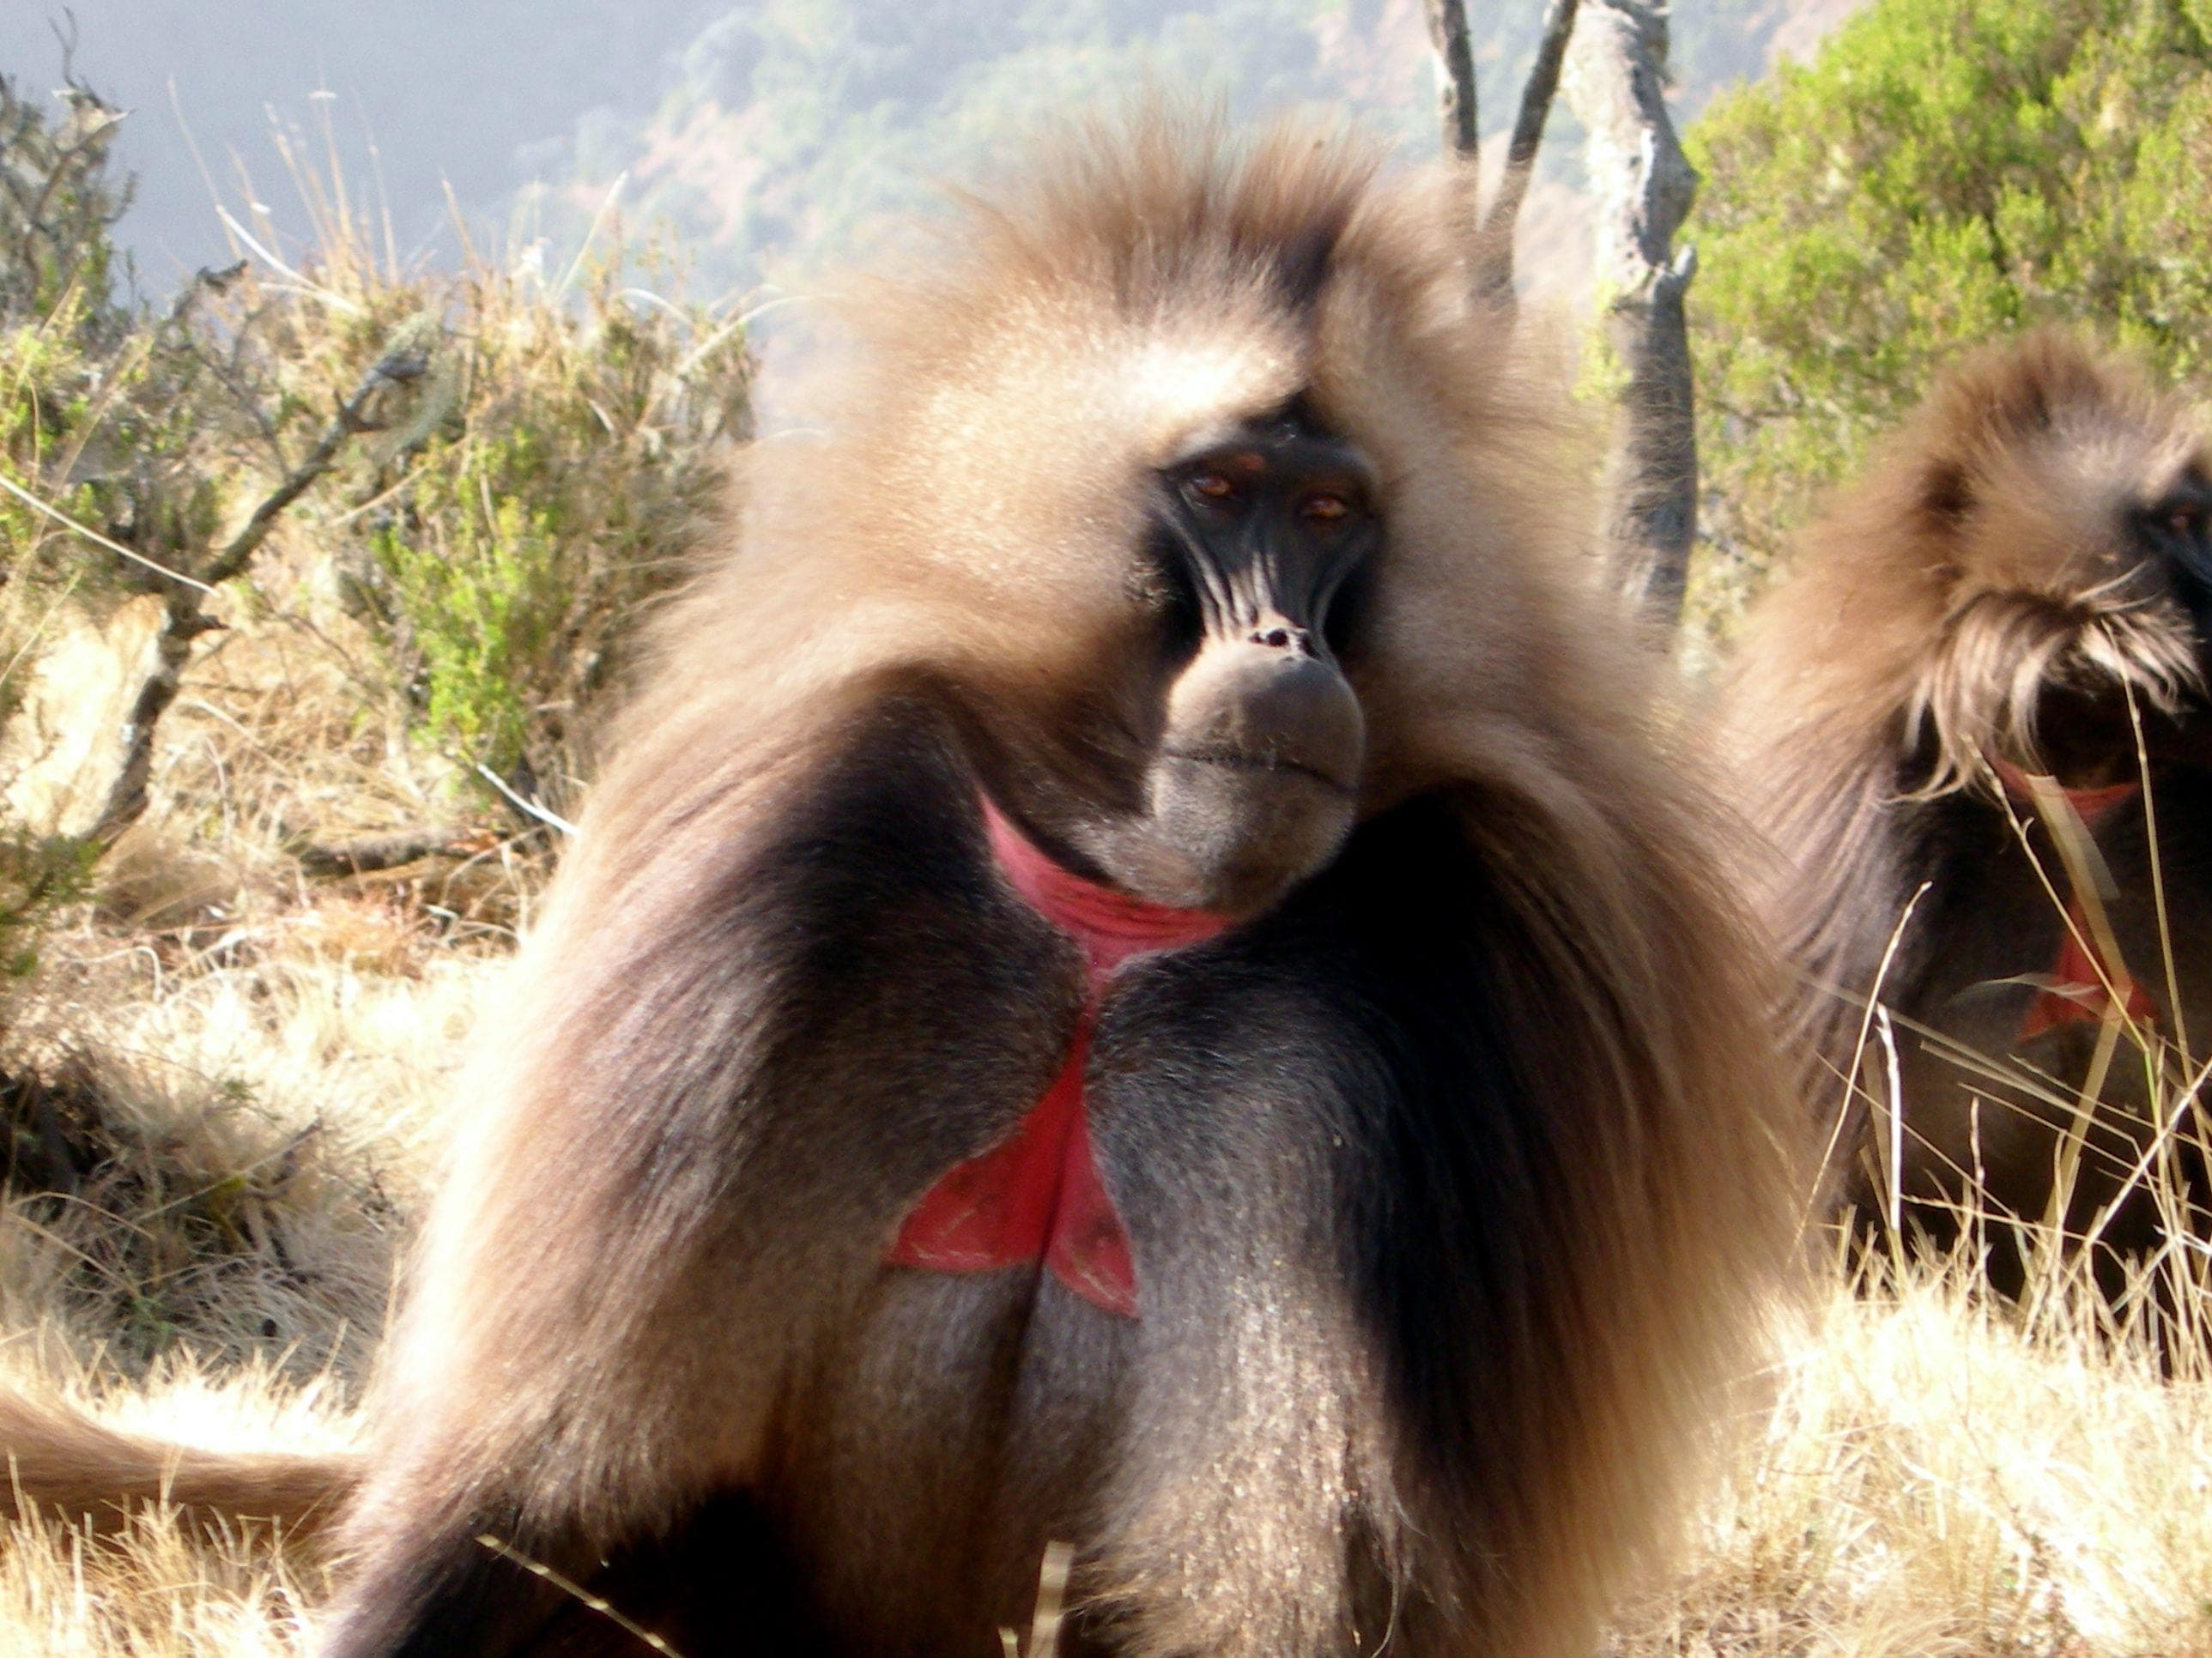 Random Fascinating Things You Might Not Know About Gelada Baboons